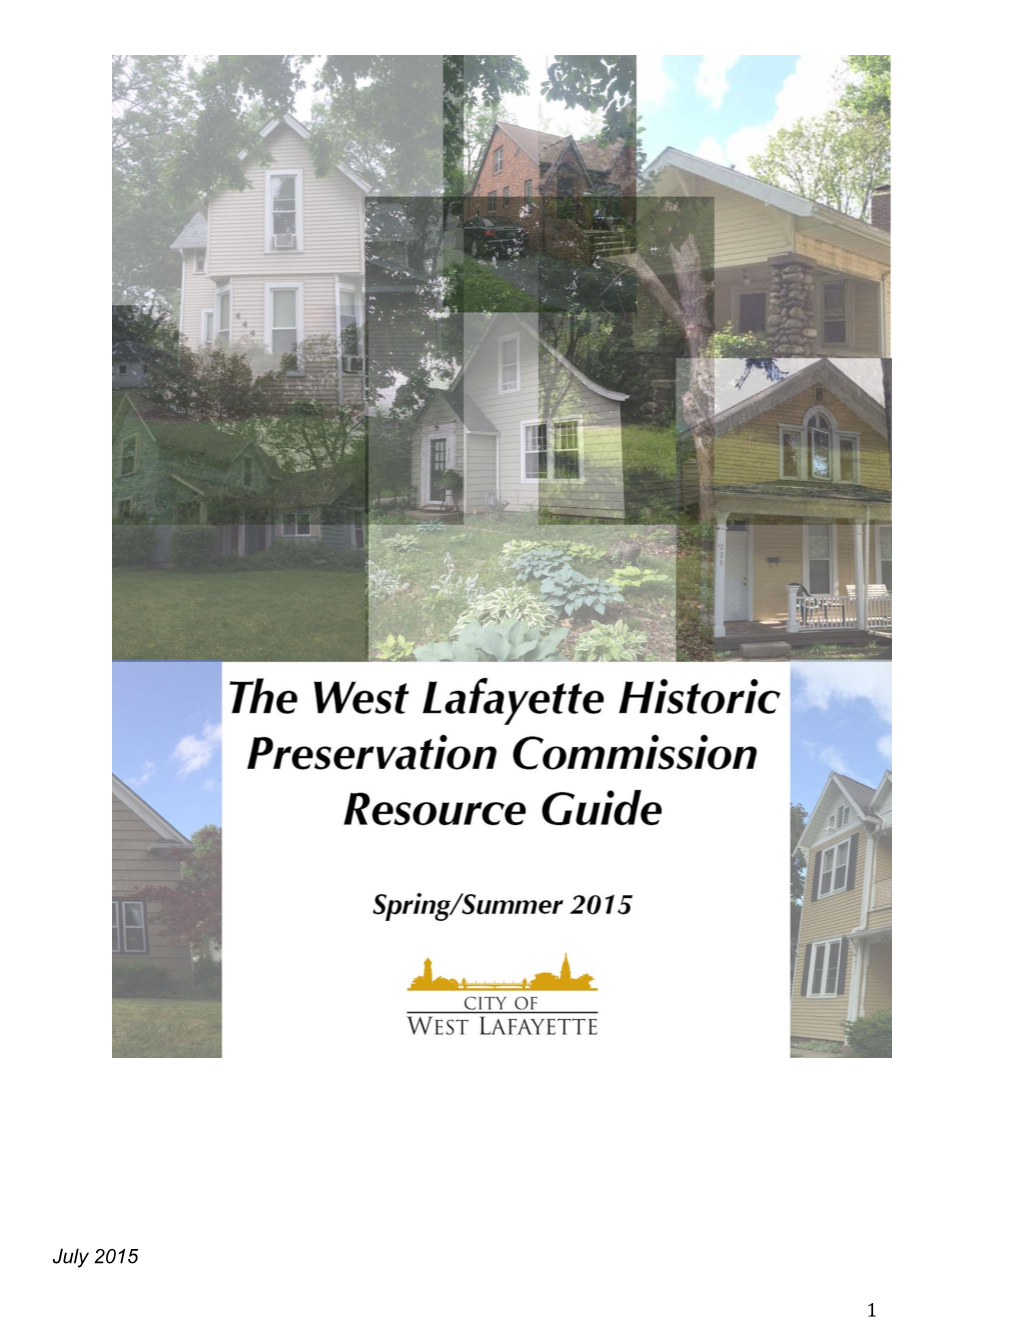 West Lafayette Historic Preservation Commission; the City of West Lafayette; and the Wabash Valley Trust for Historic Preservation